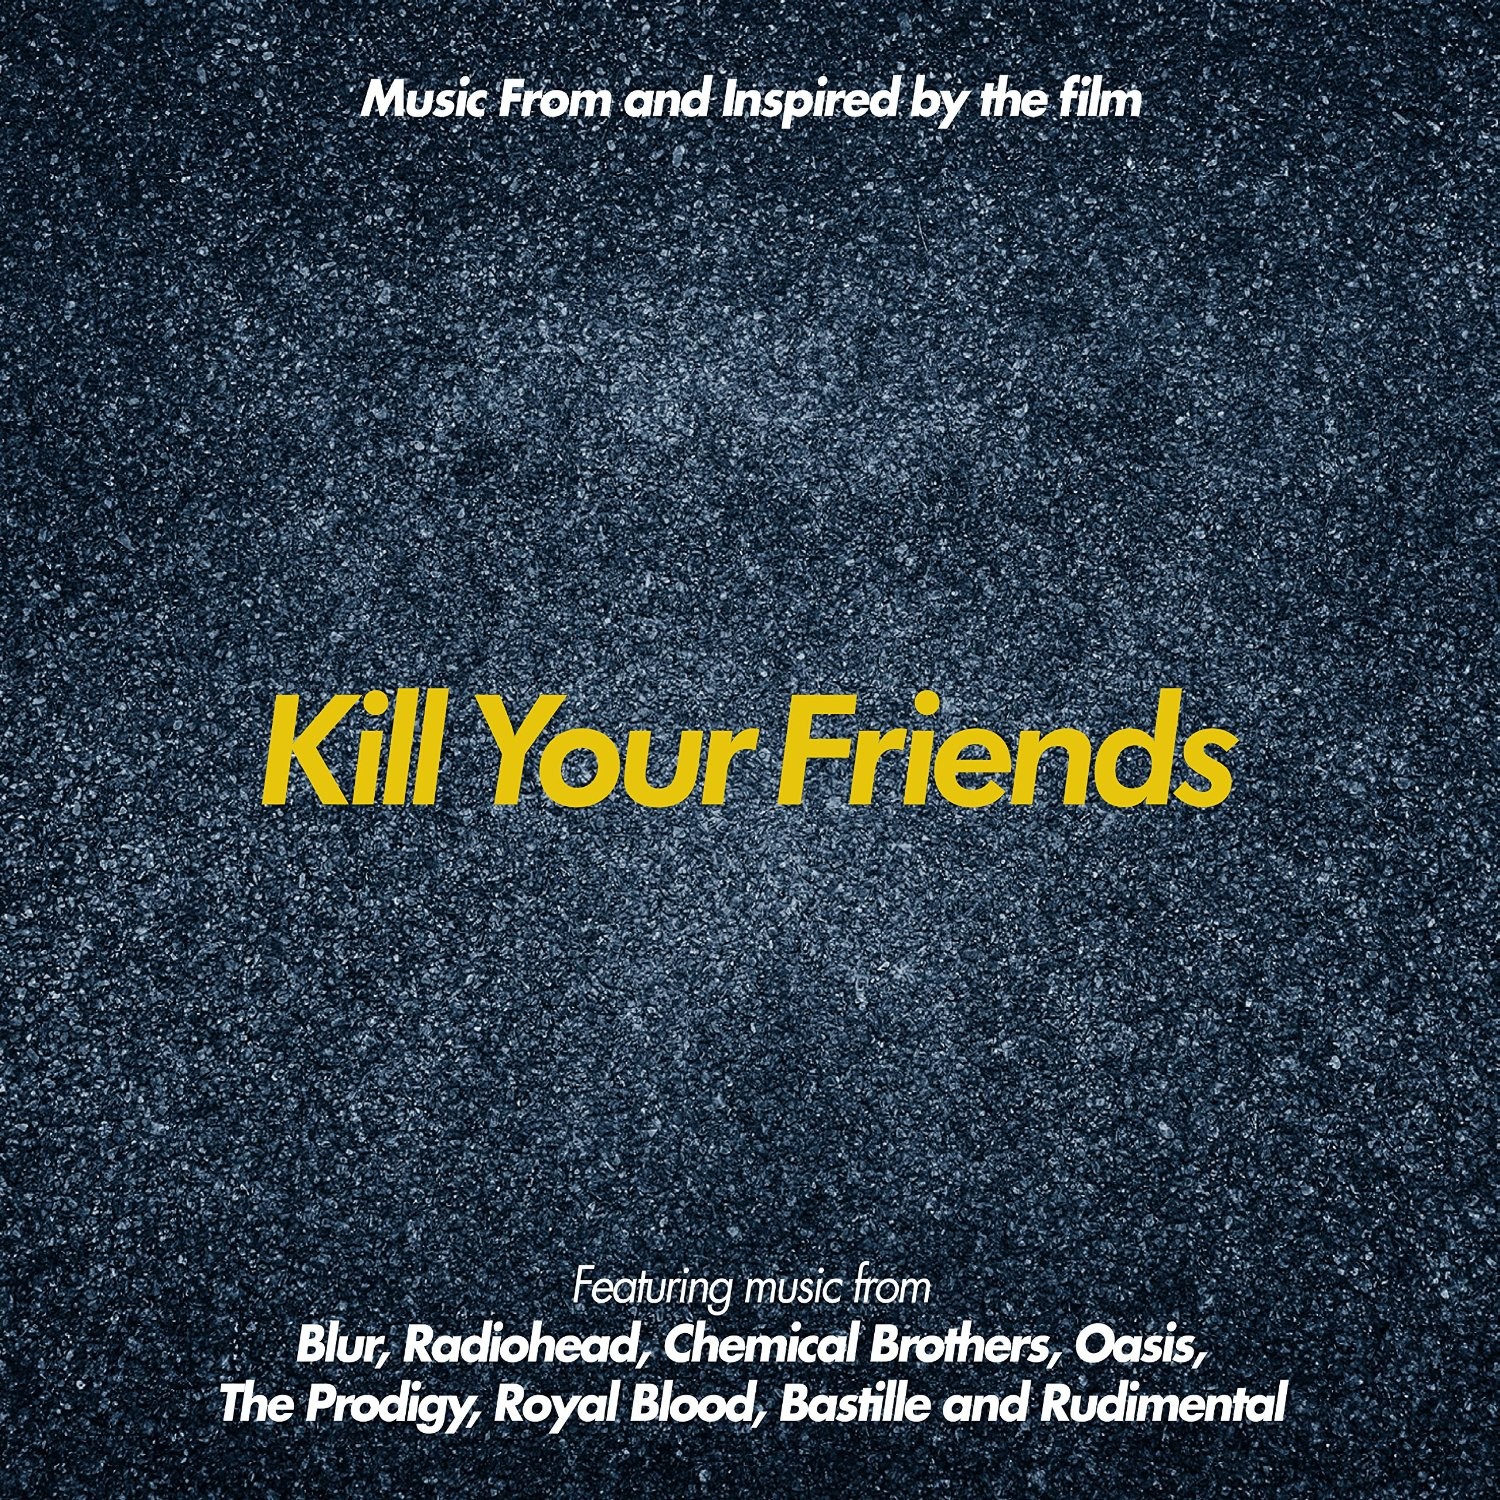 Feature music. Kill your friends. Kill all your friends альбом. Friends OST album Cover. Various – Overload OST.